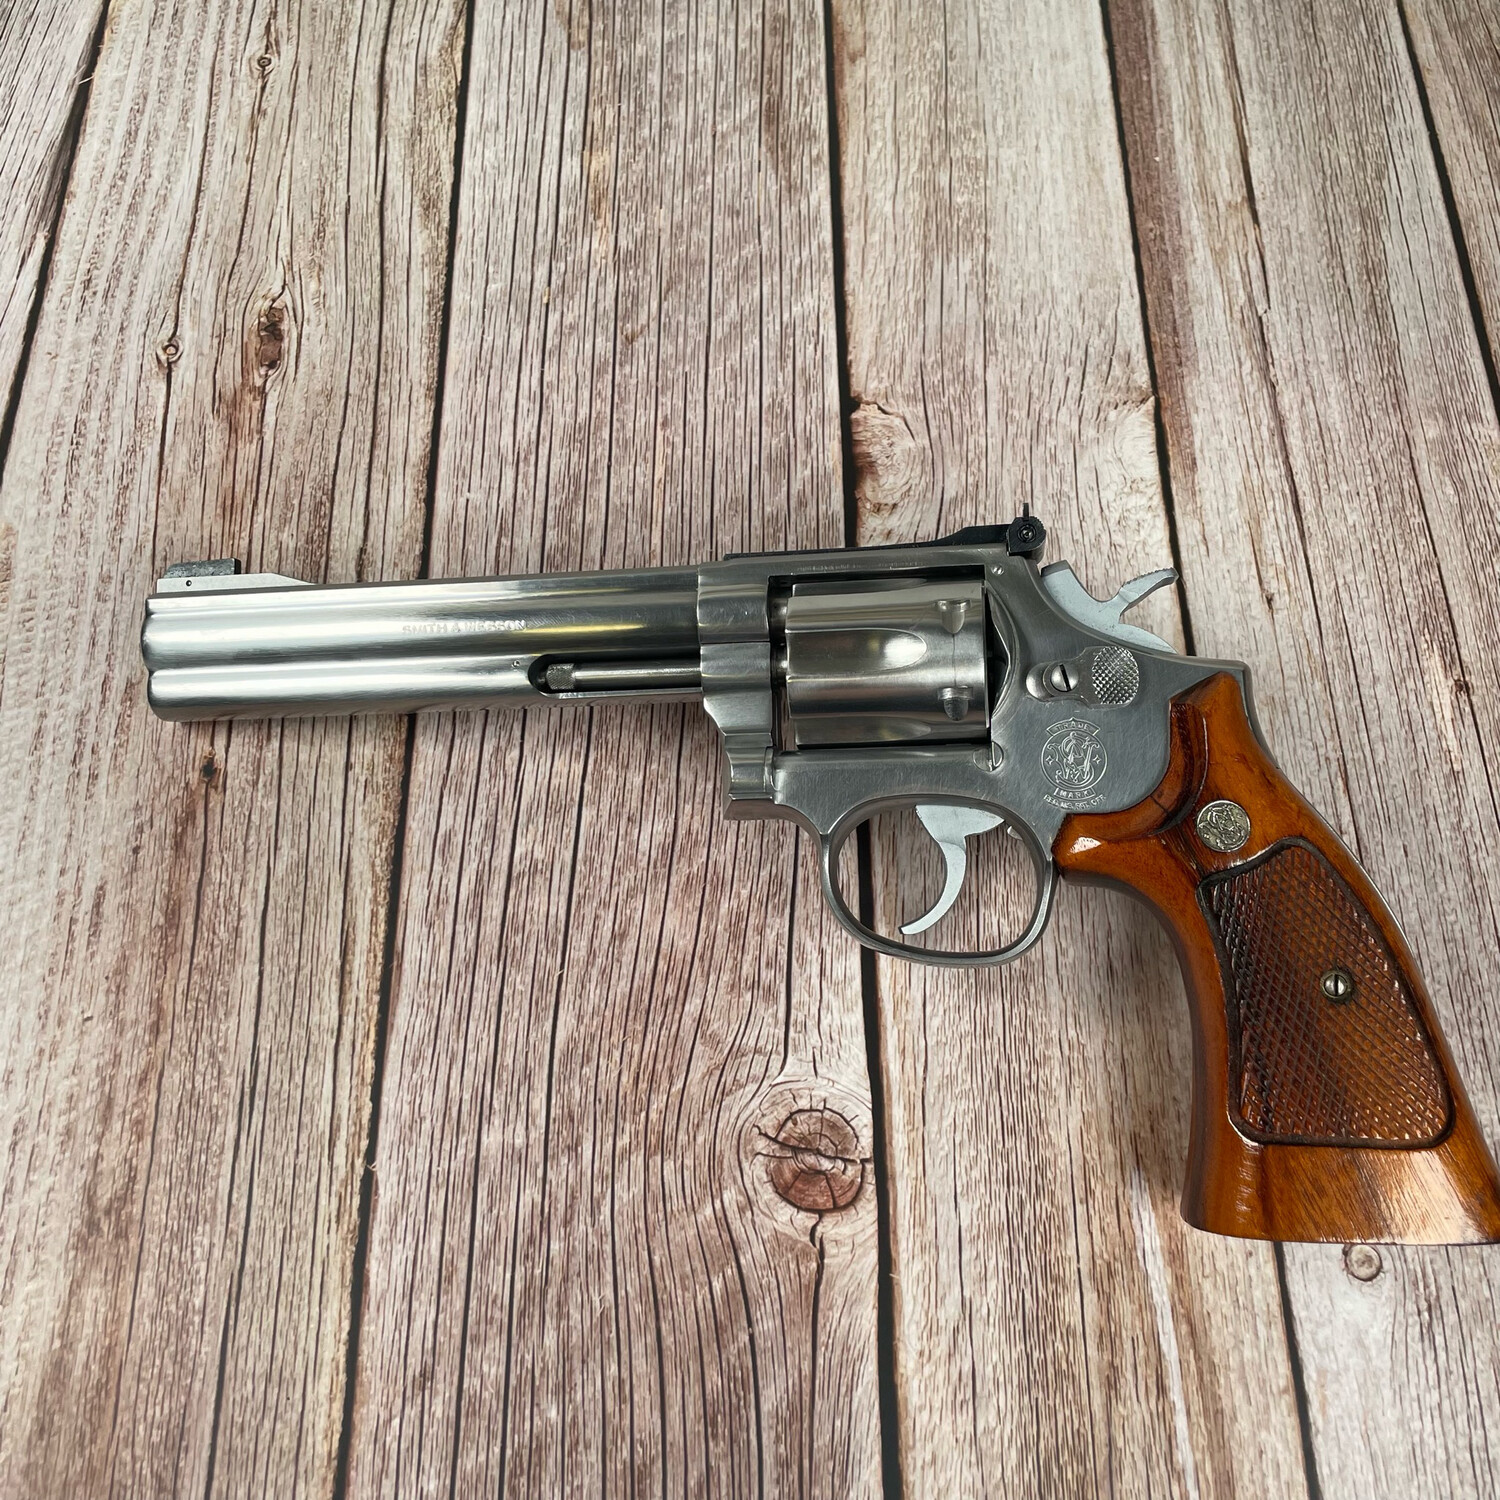 Smith & Wesson 617 Target Champion - .22lr (6 Round Chamber) | Pre-Owned